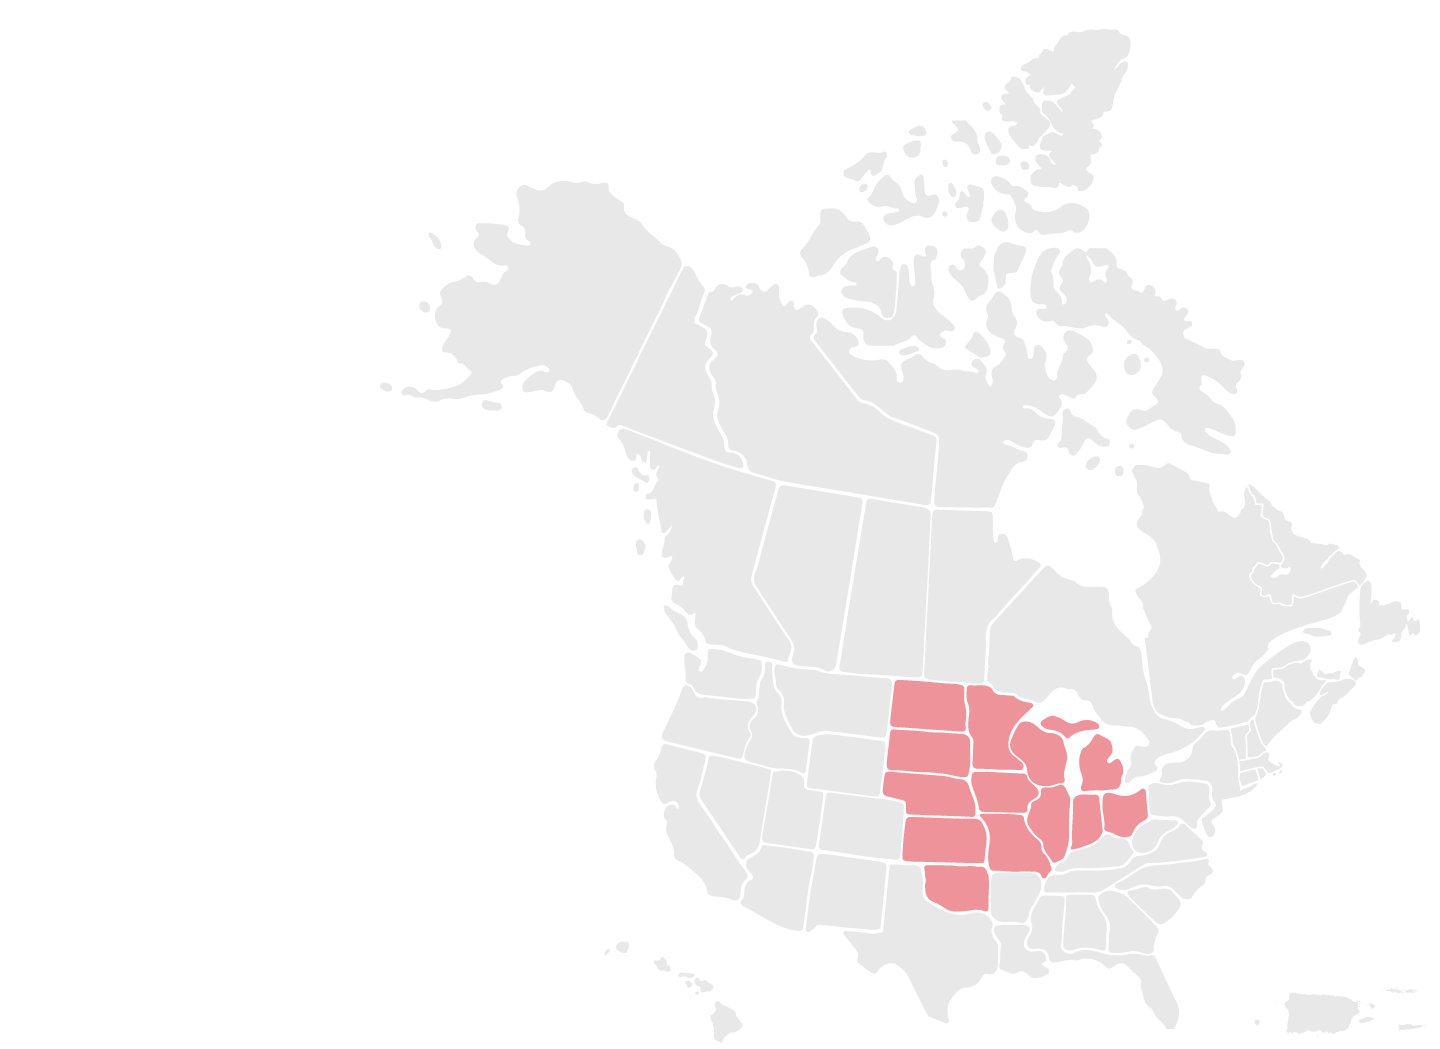 US and Canada map with central US states highlighted in red